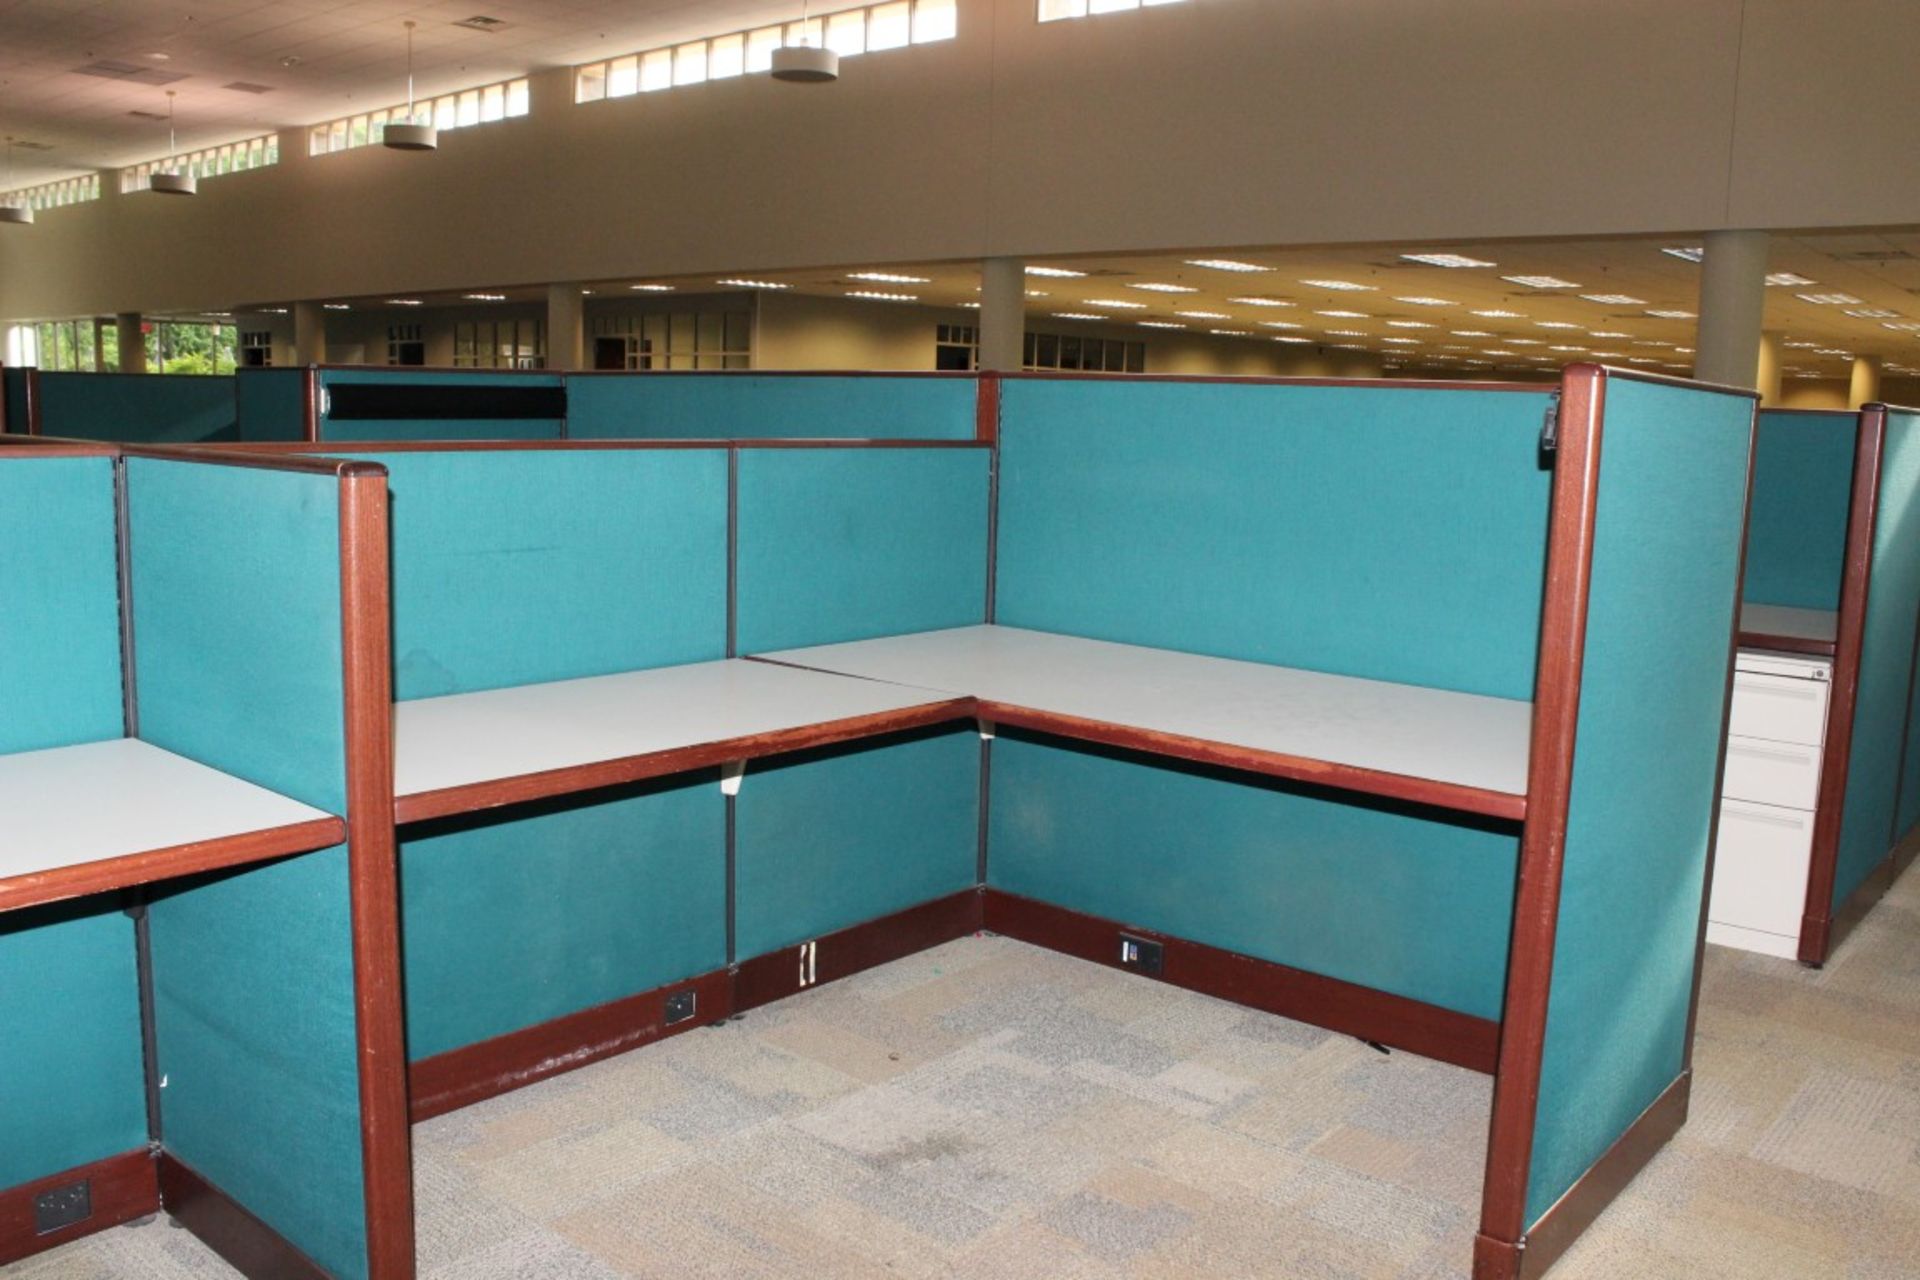 EXECUTIVE OFFICE CUBICLES. DISMANTLED & READY TO LOAD - Image 14 of 15